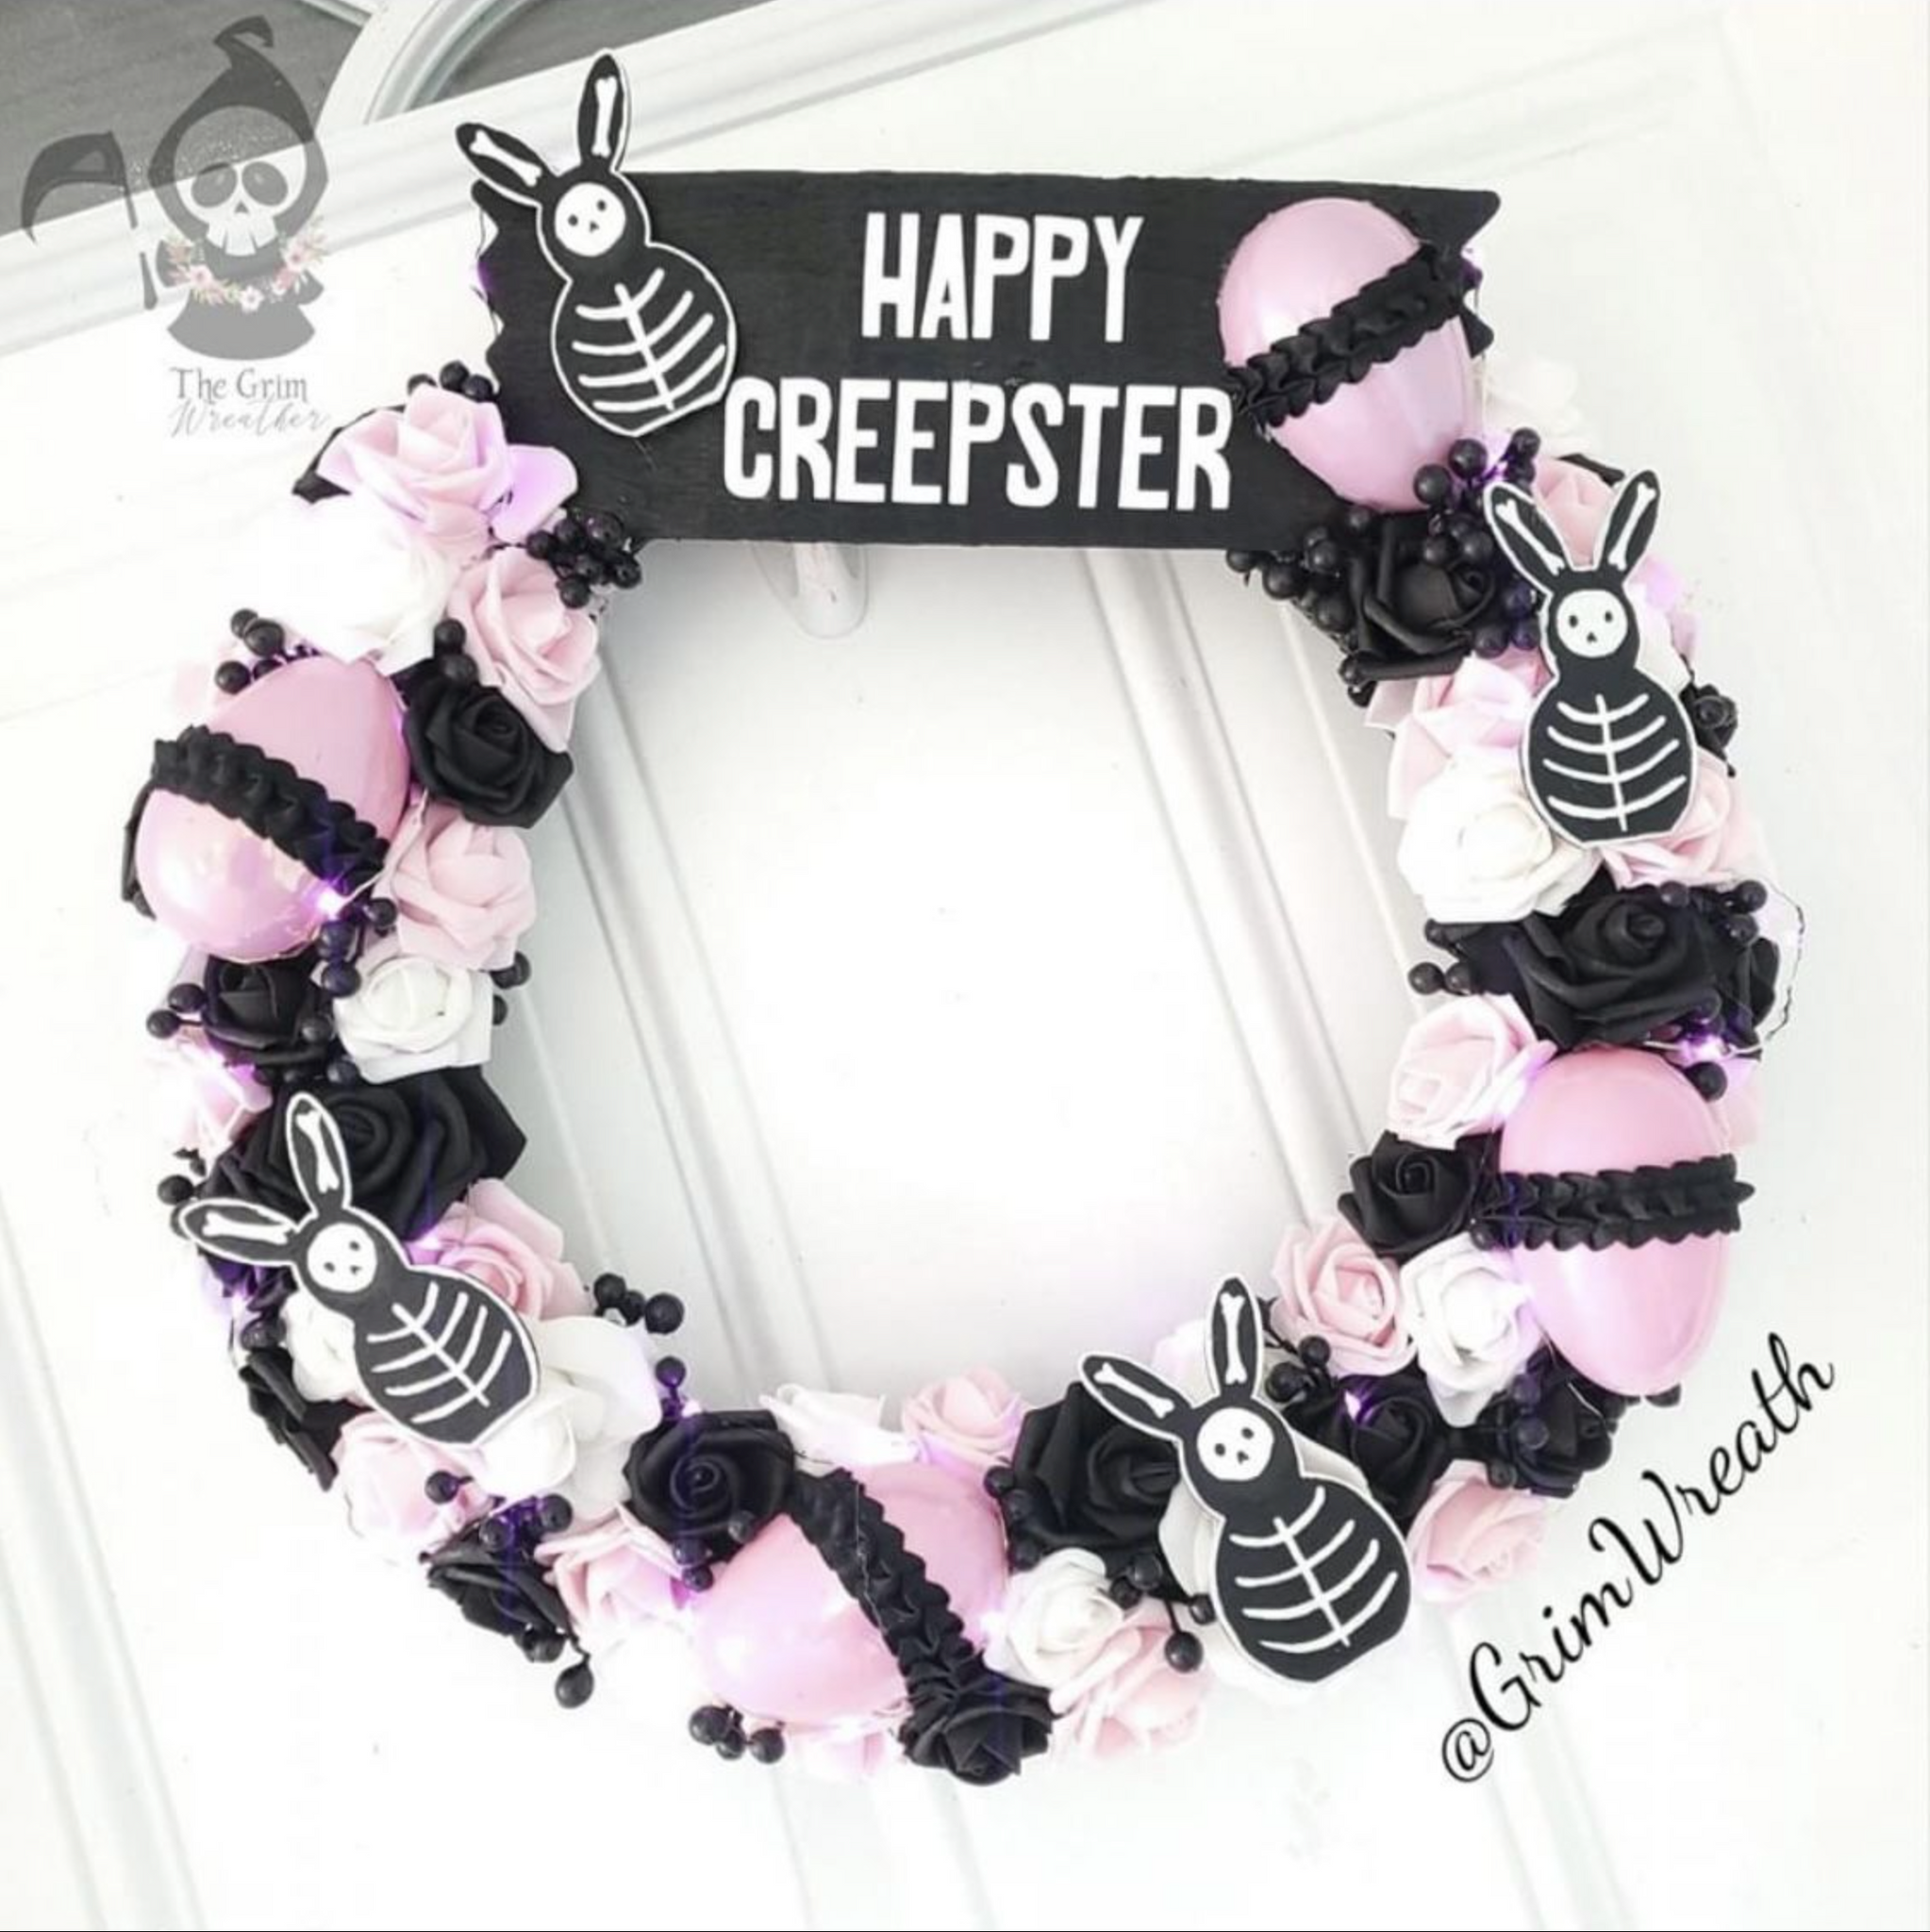 Happy Creepster themed pastel goth spooky style easter wreath handmade by the grim wreather for easterween easter-ween spooky easter halloween.